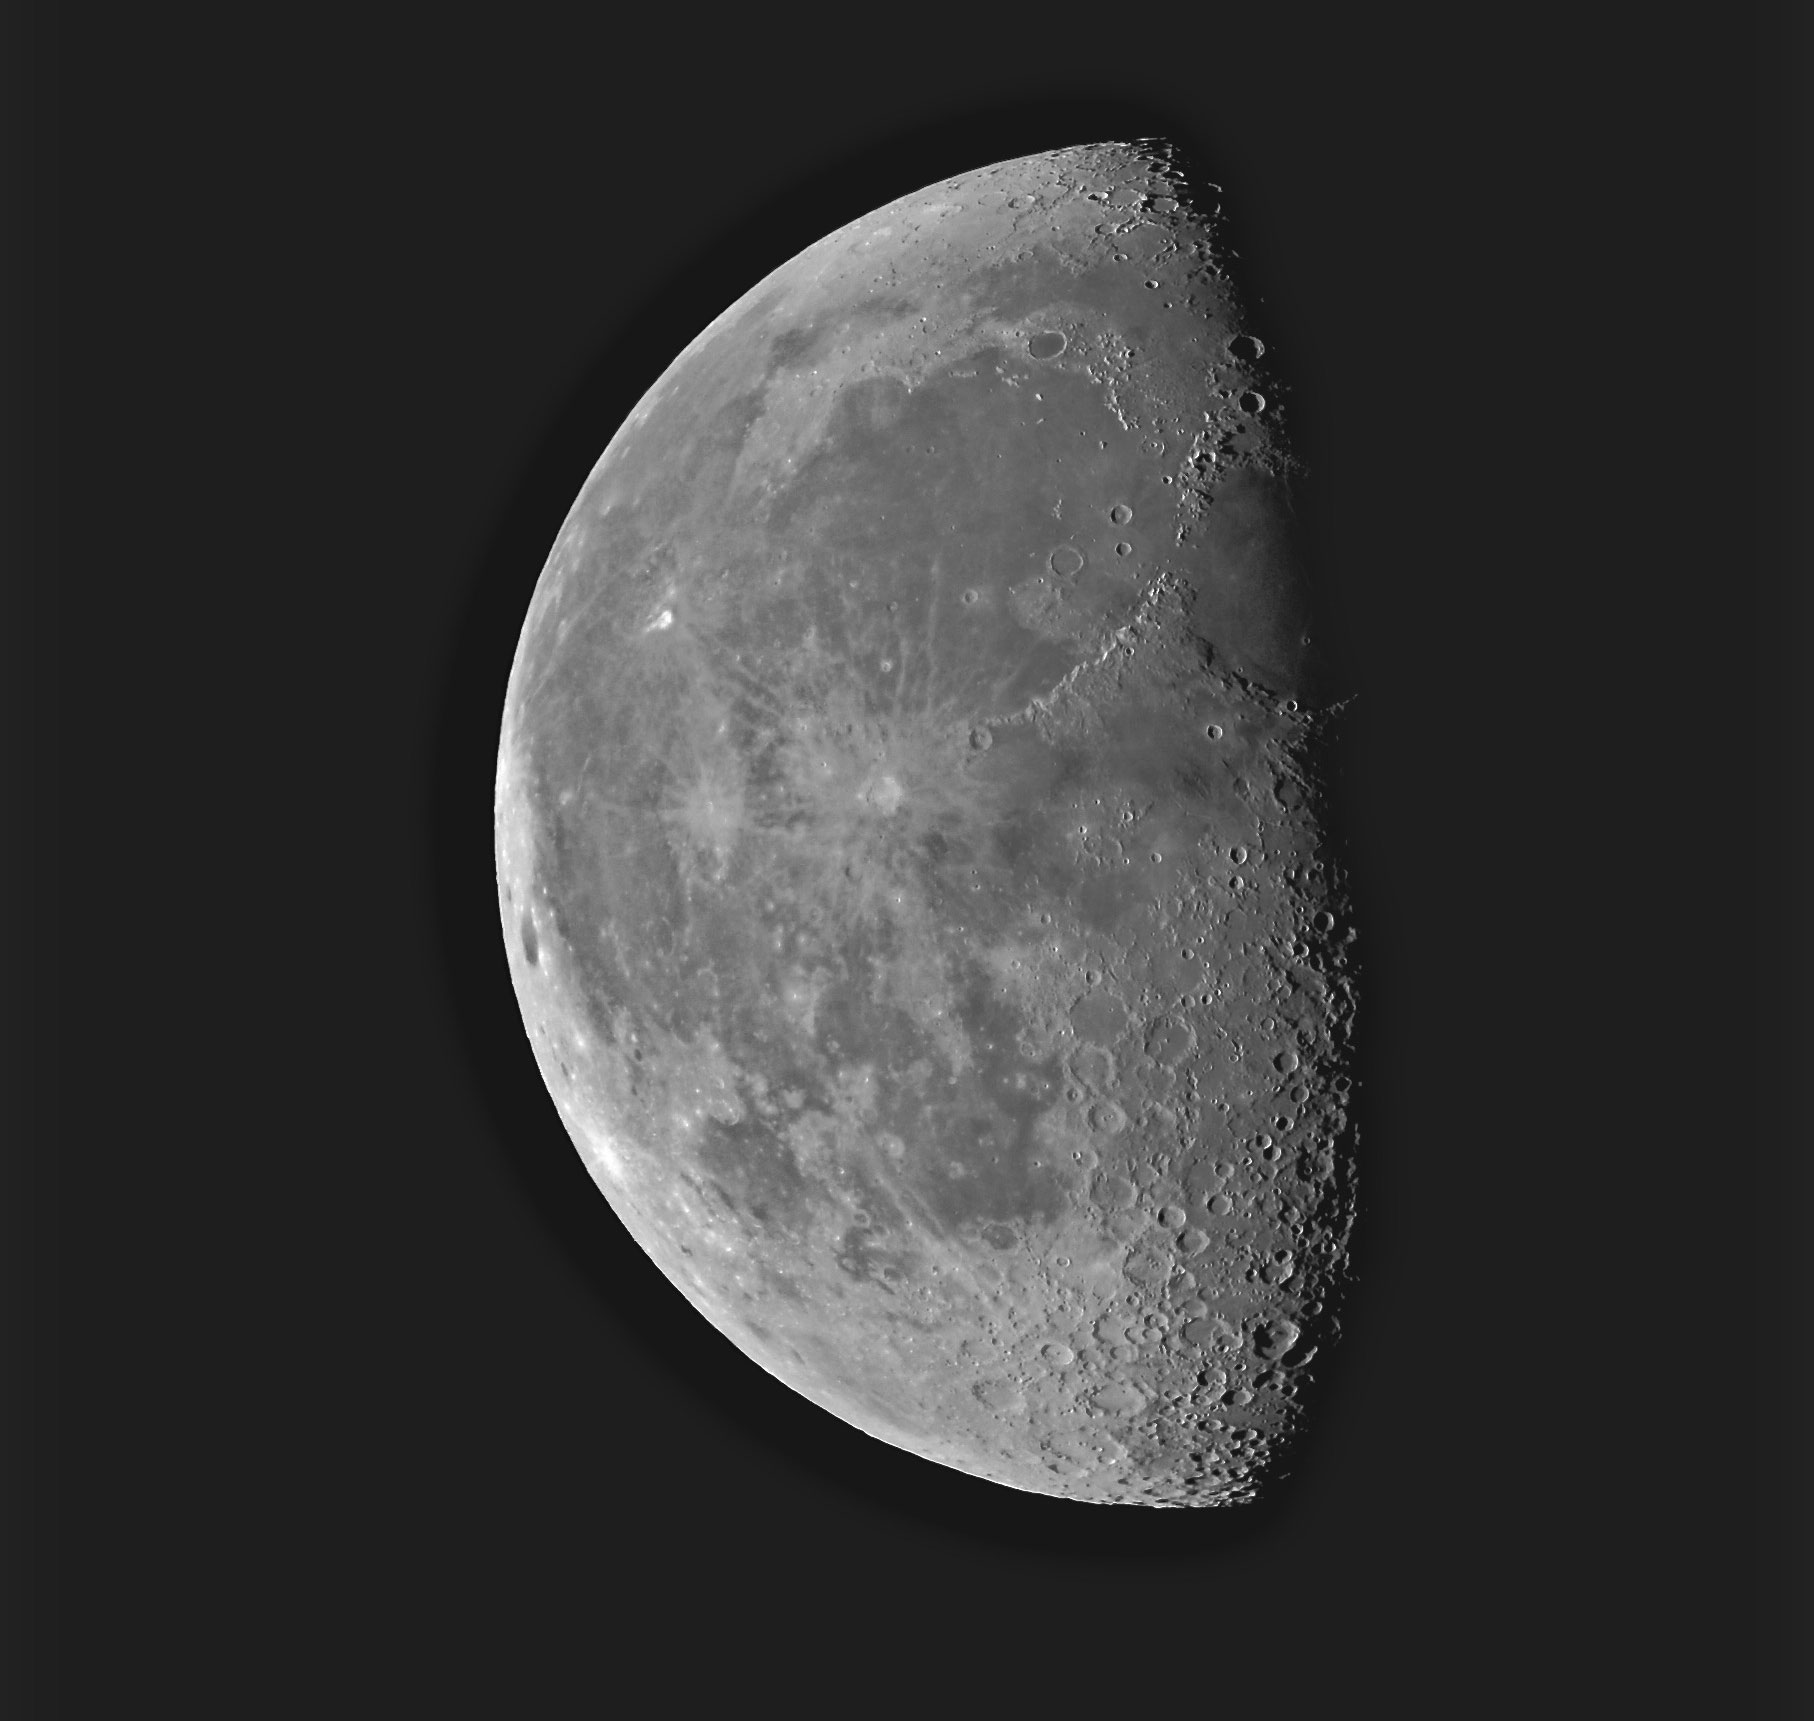 A photo of the moon. The moon is half shaded in darkness.